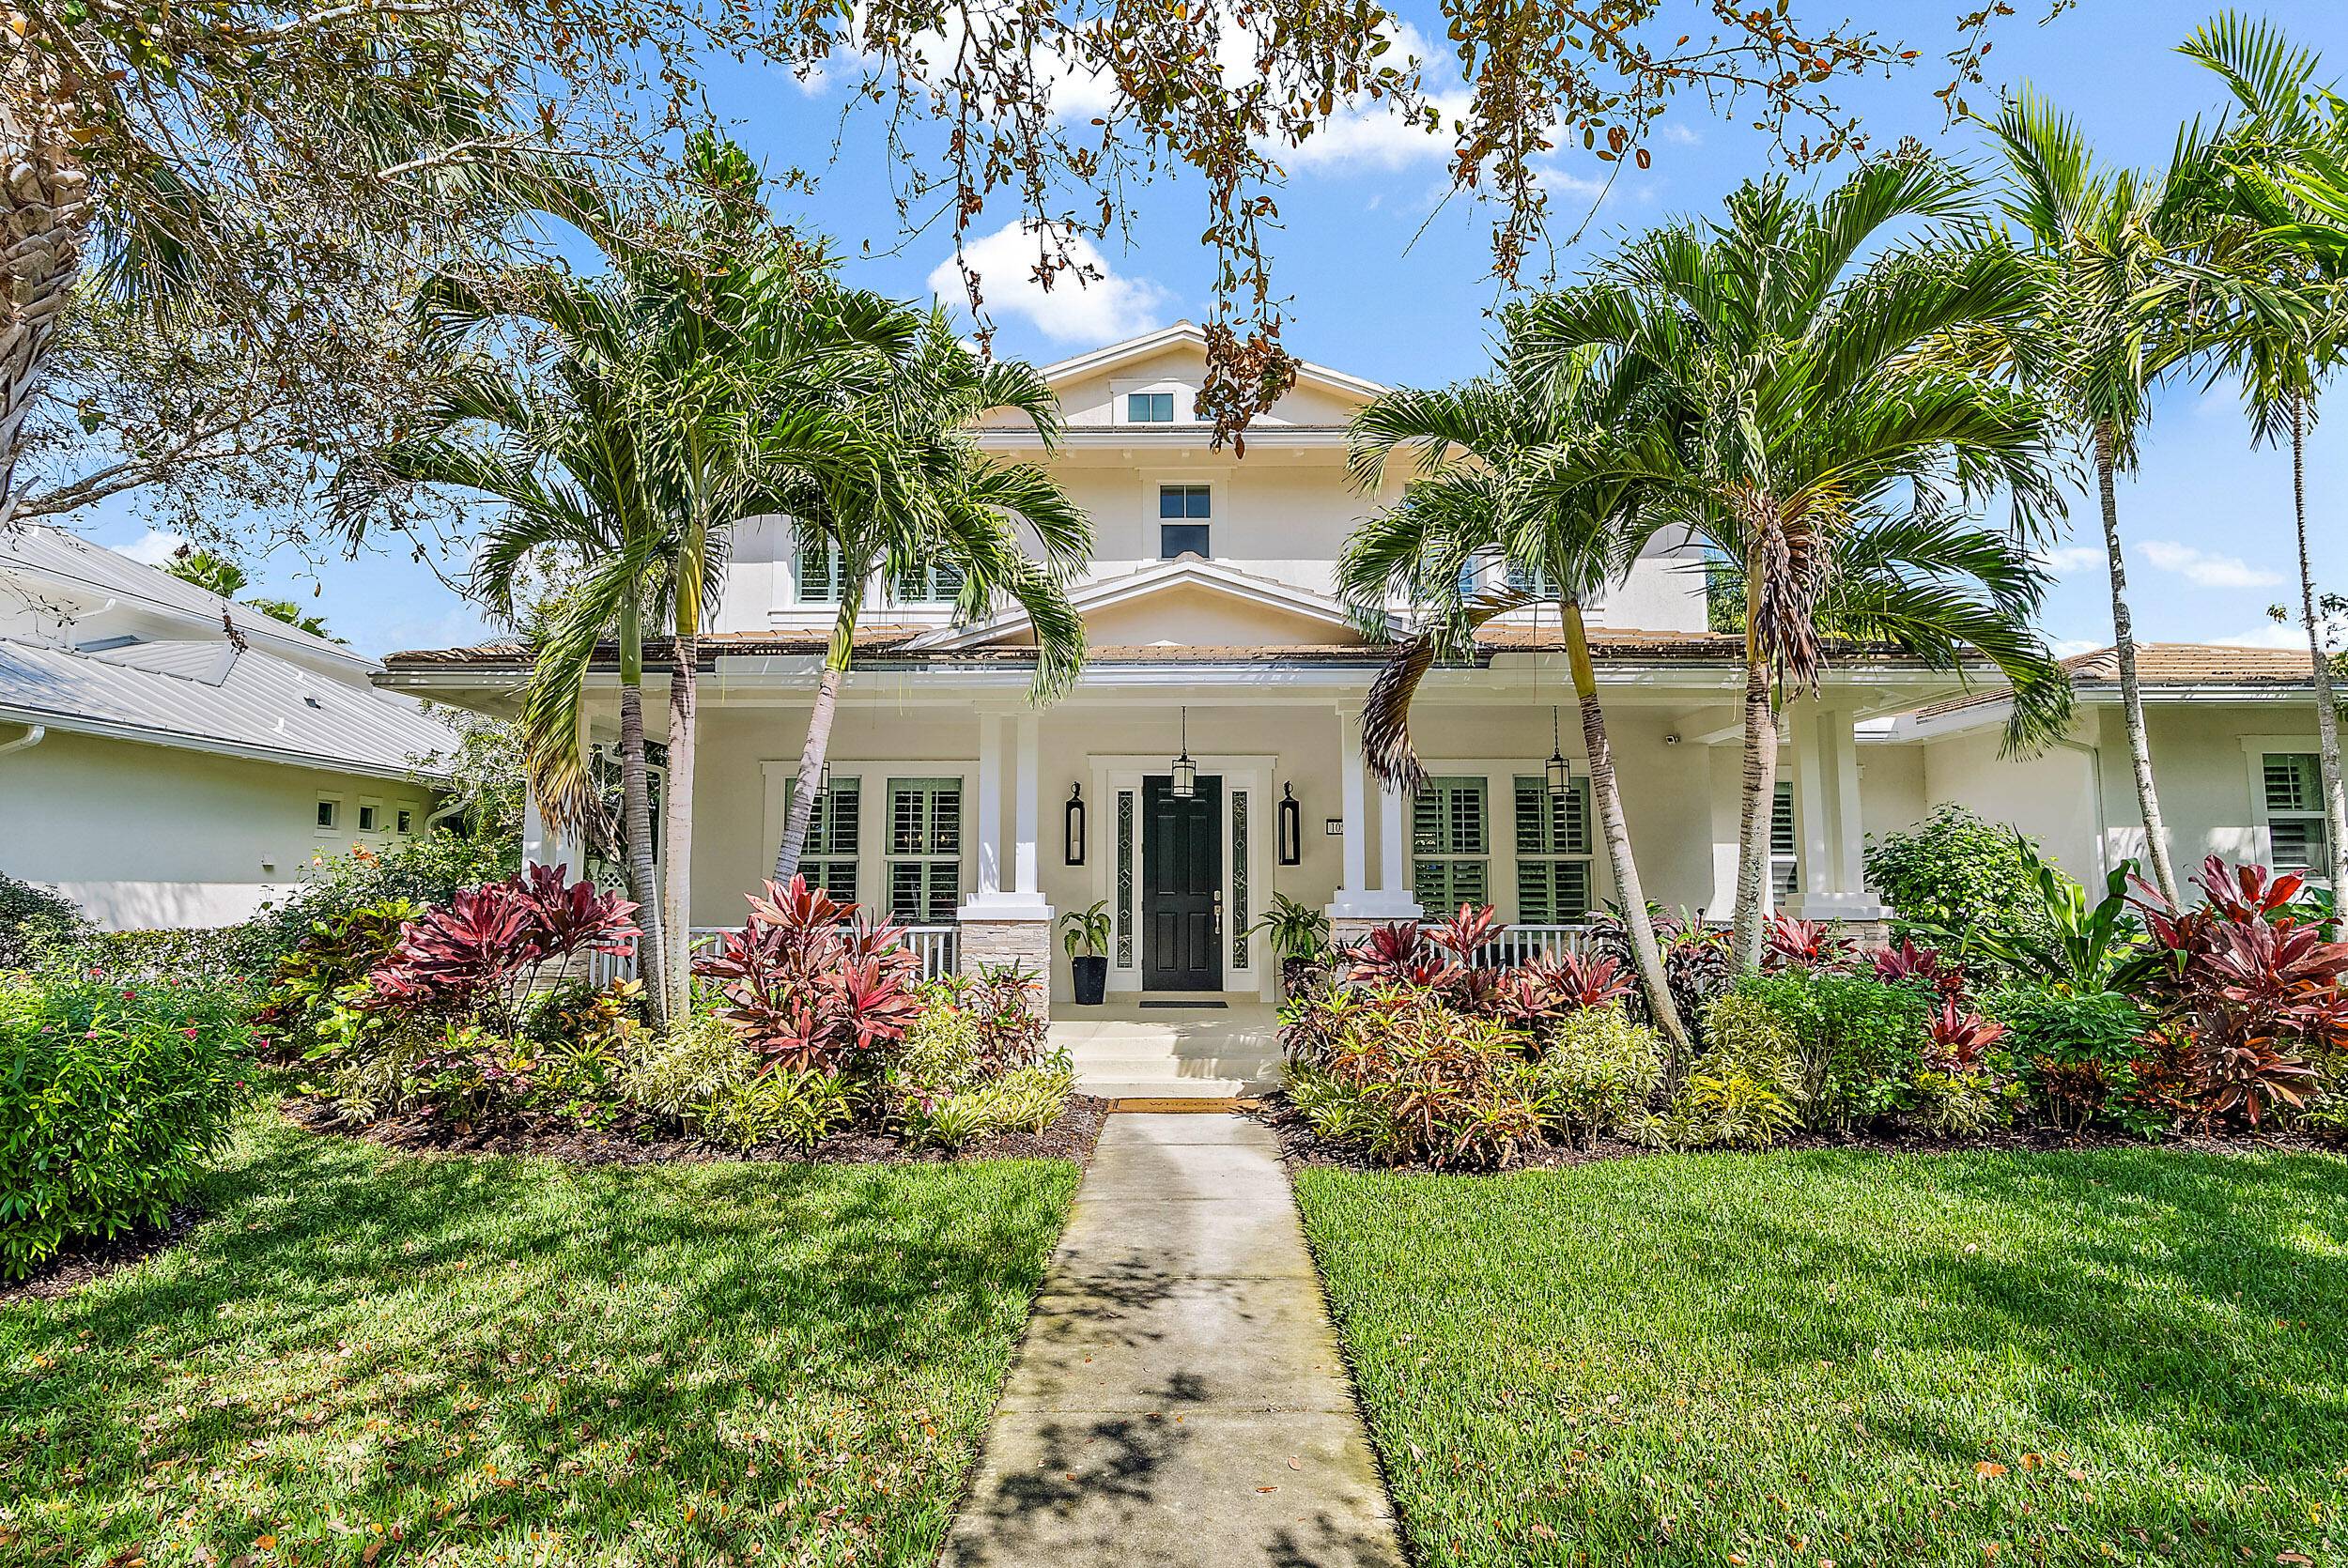 Immaculate, Fully Furnished, Turn key rental opportunity in the heart of Jupiter.